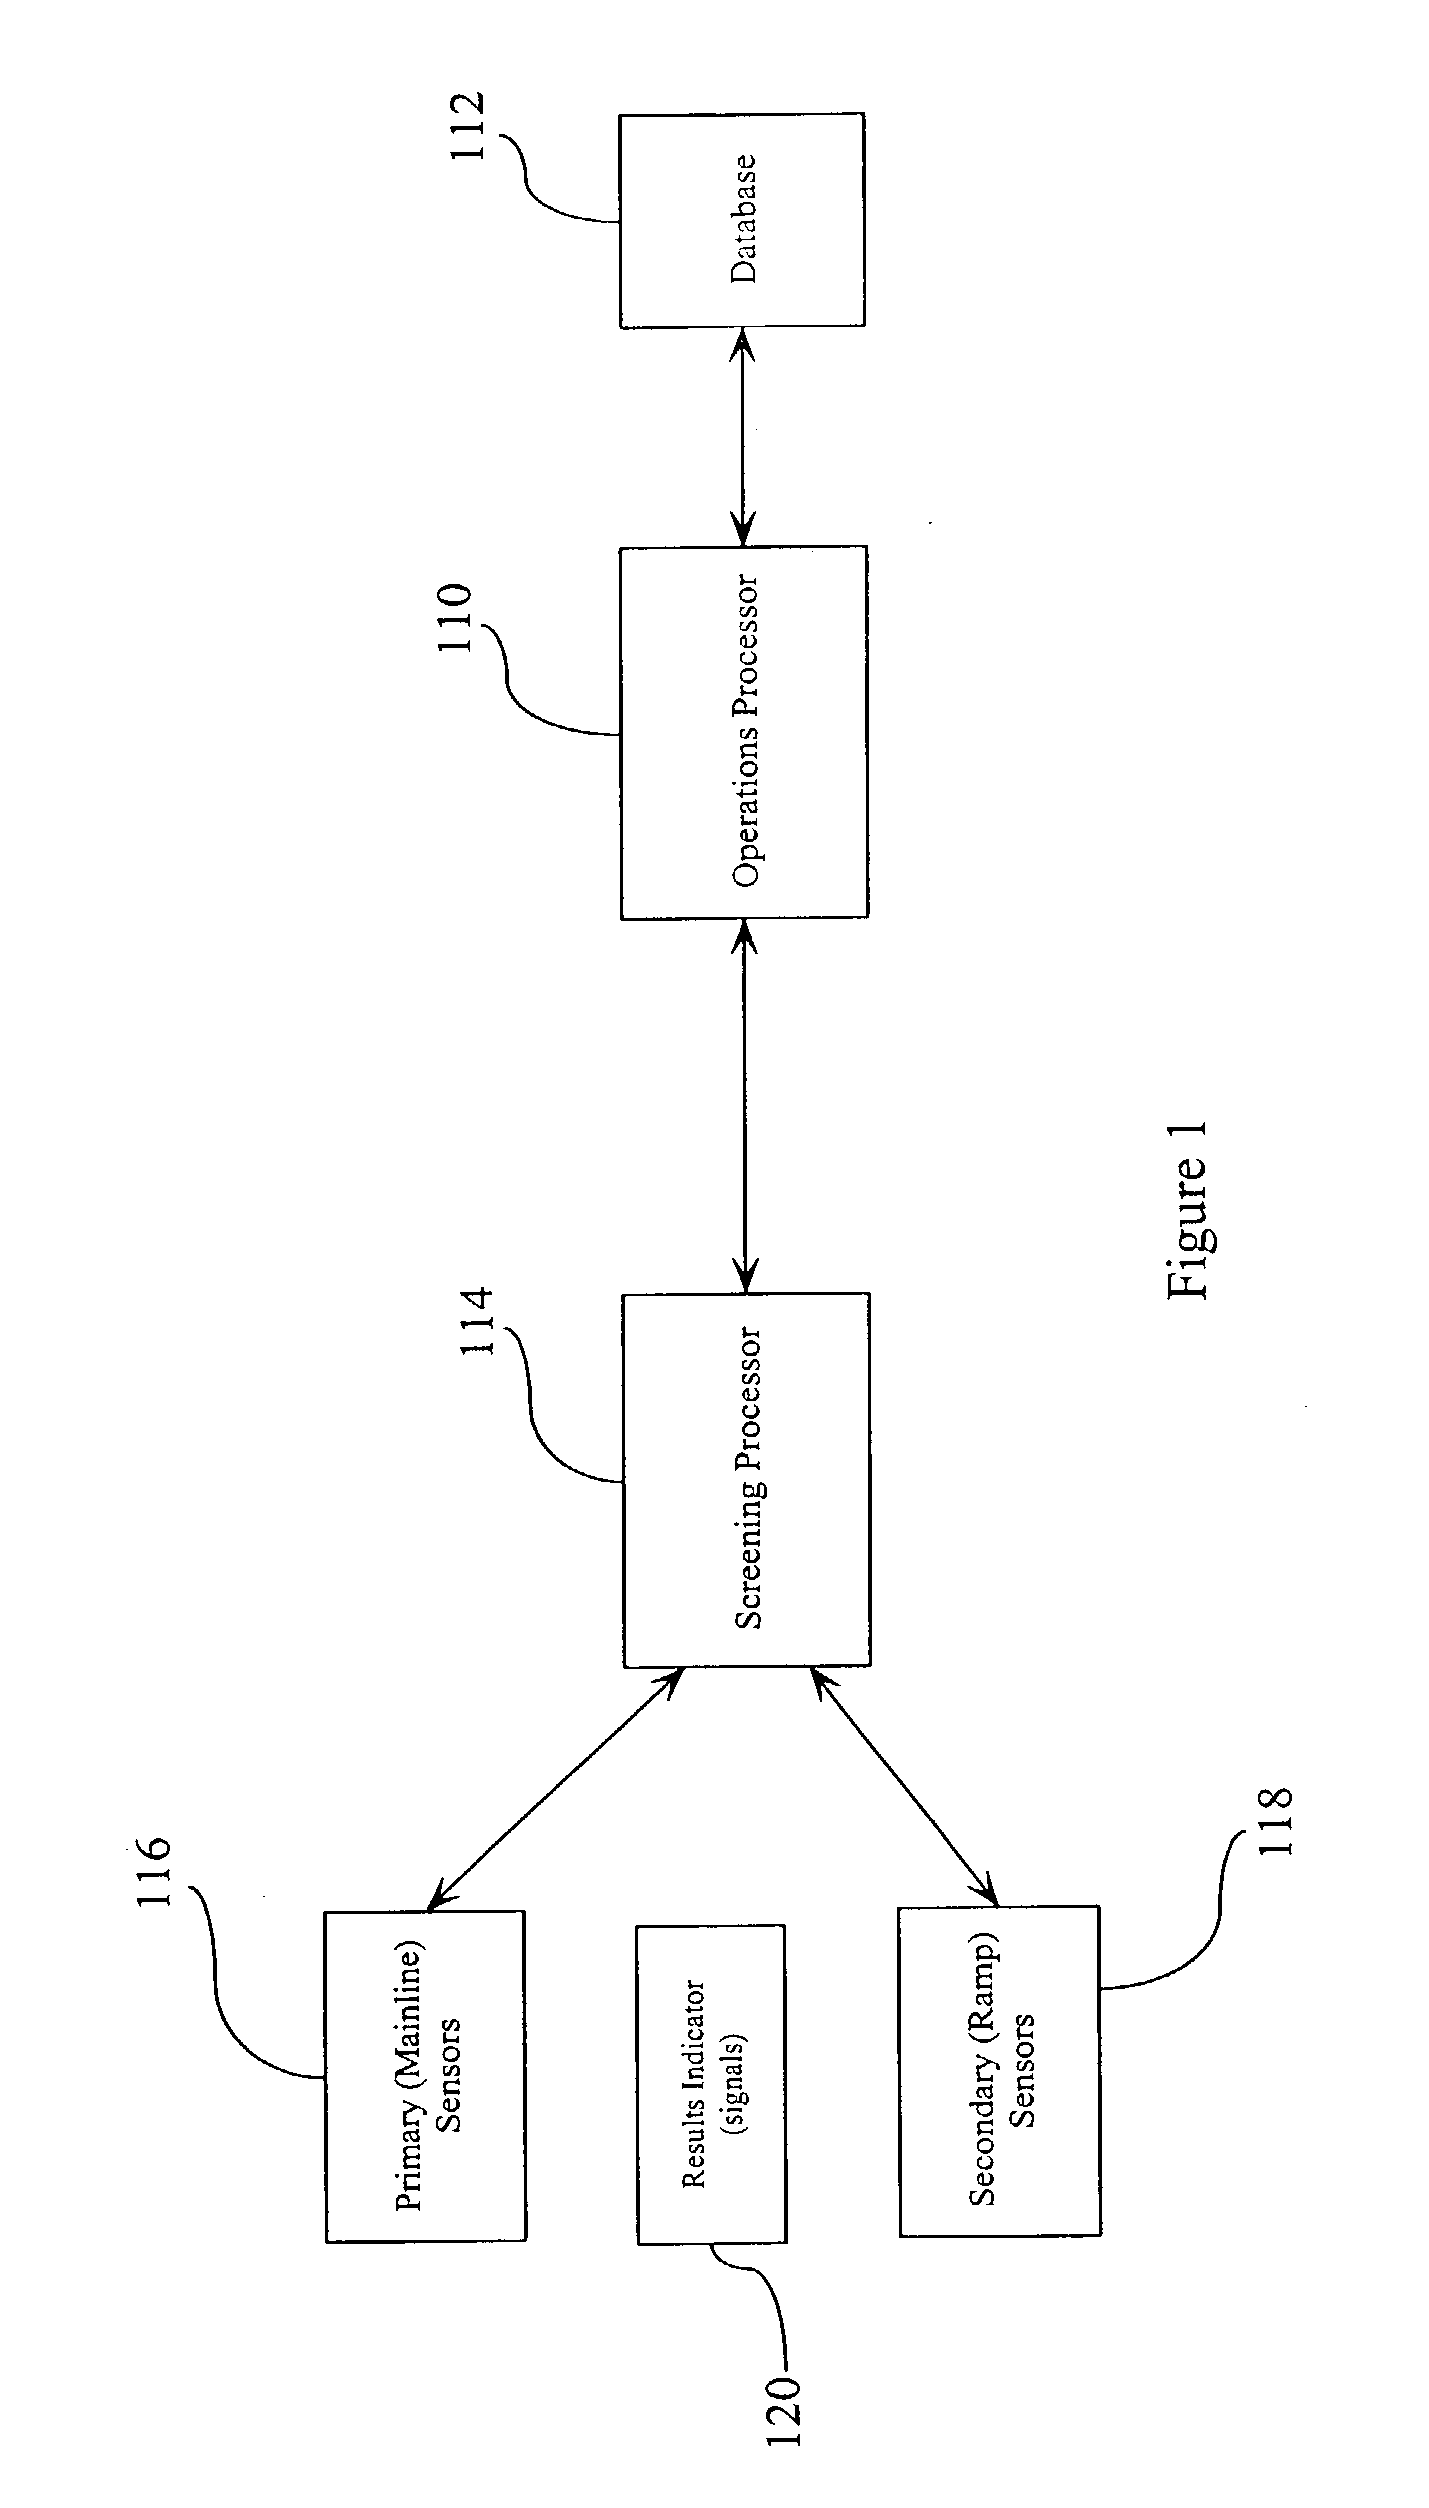 Commercial vehicle electronic screening hardware/software system with primary and secondary sensor sets